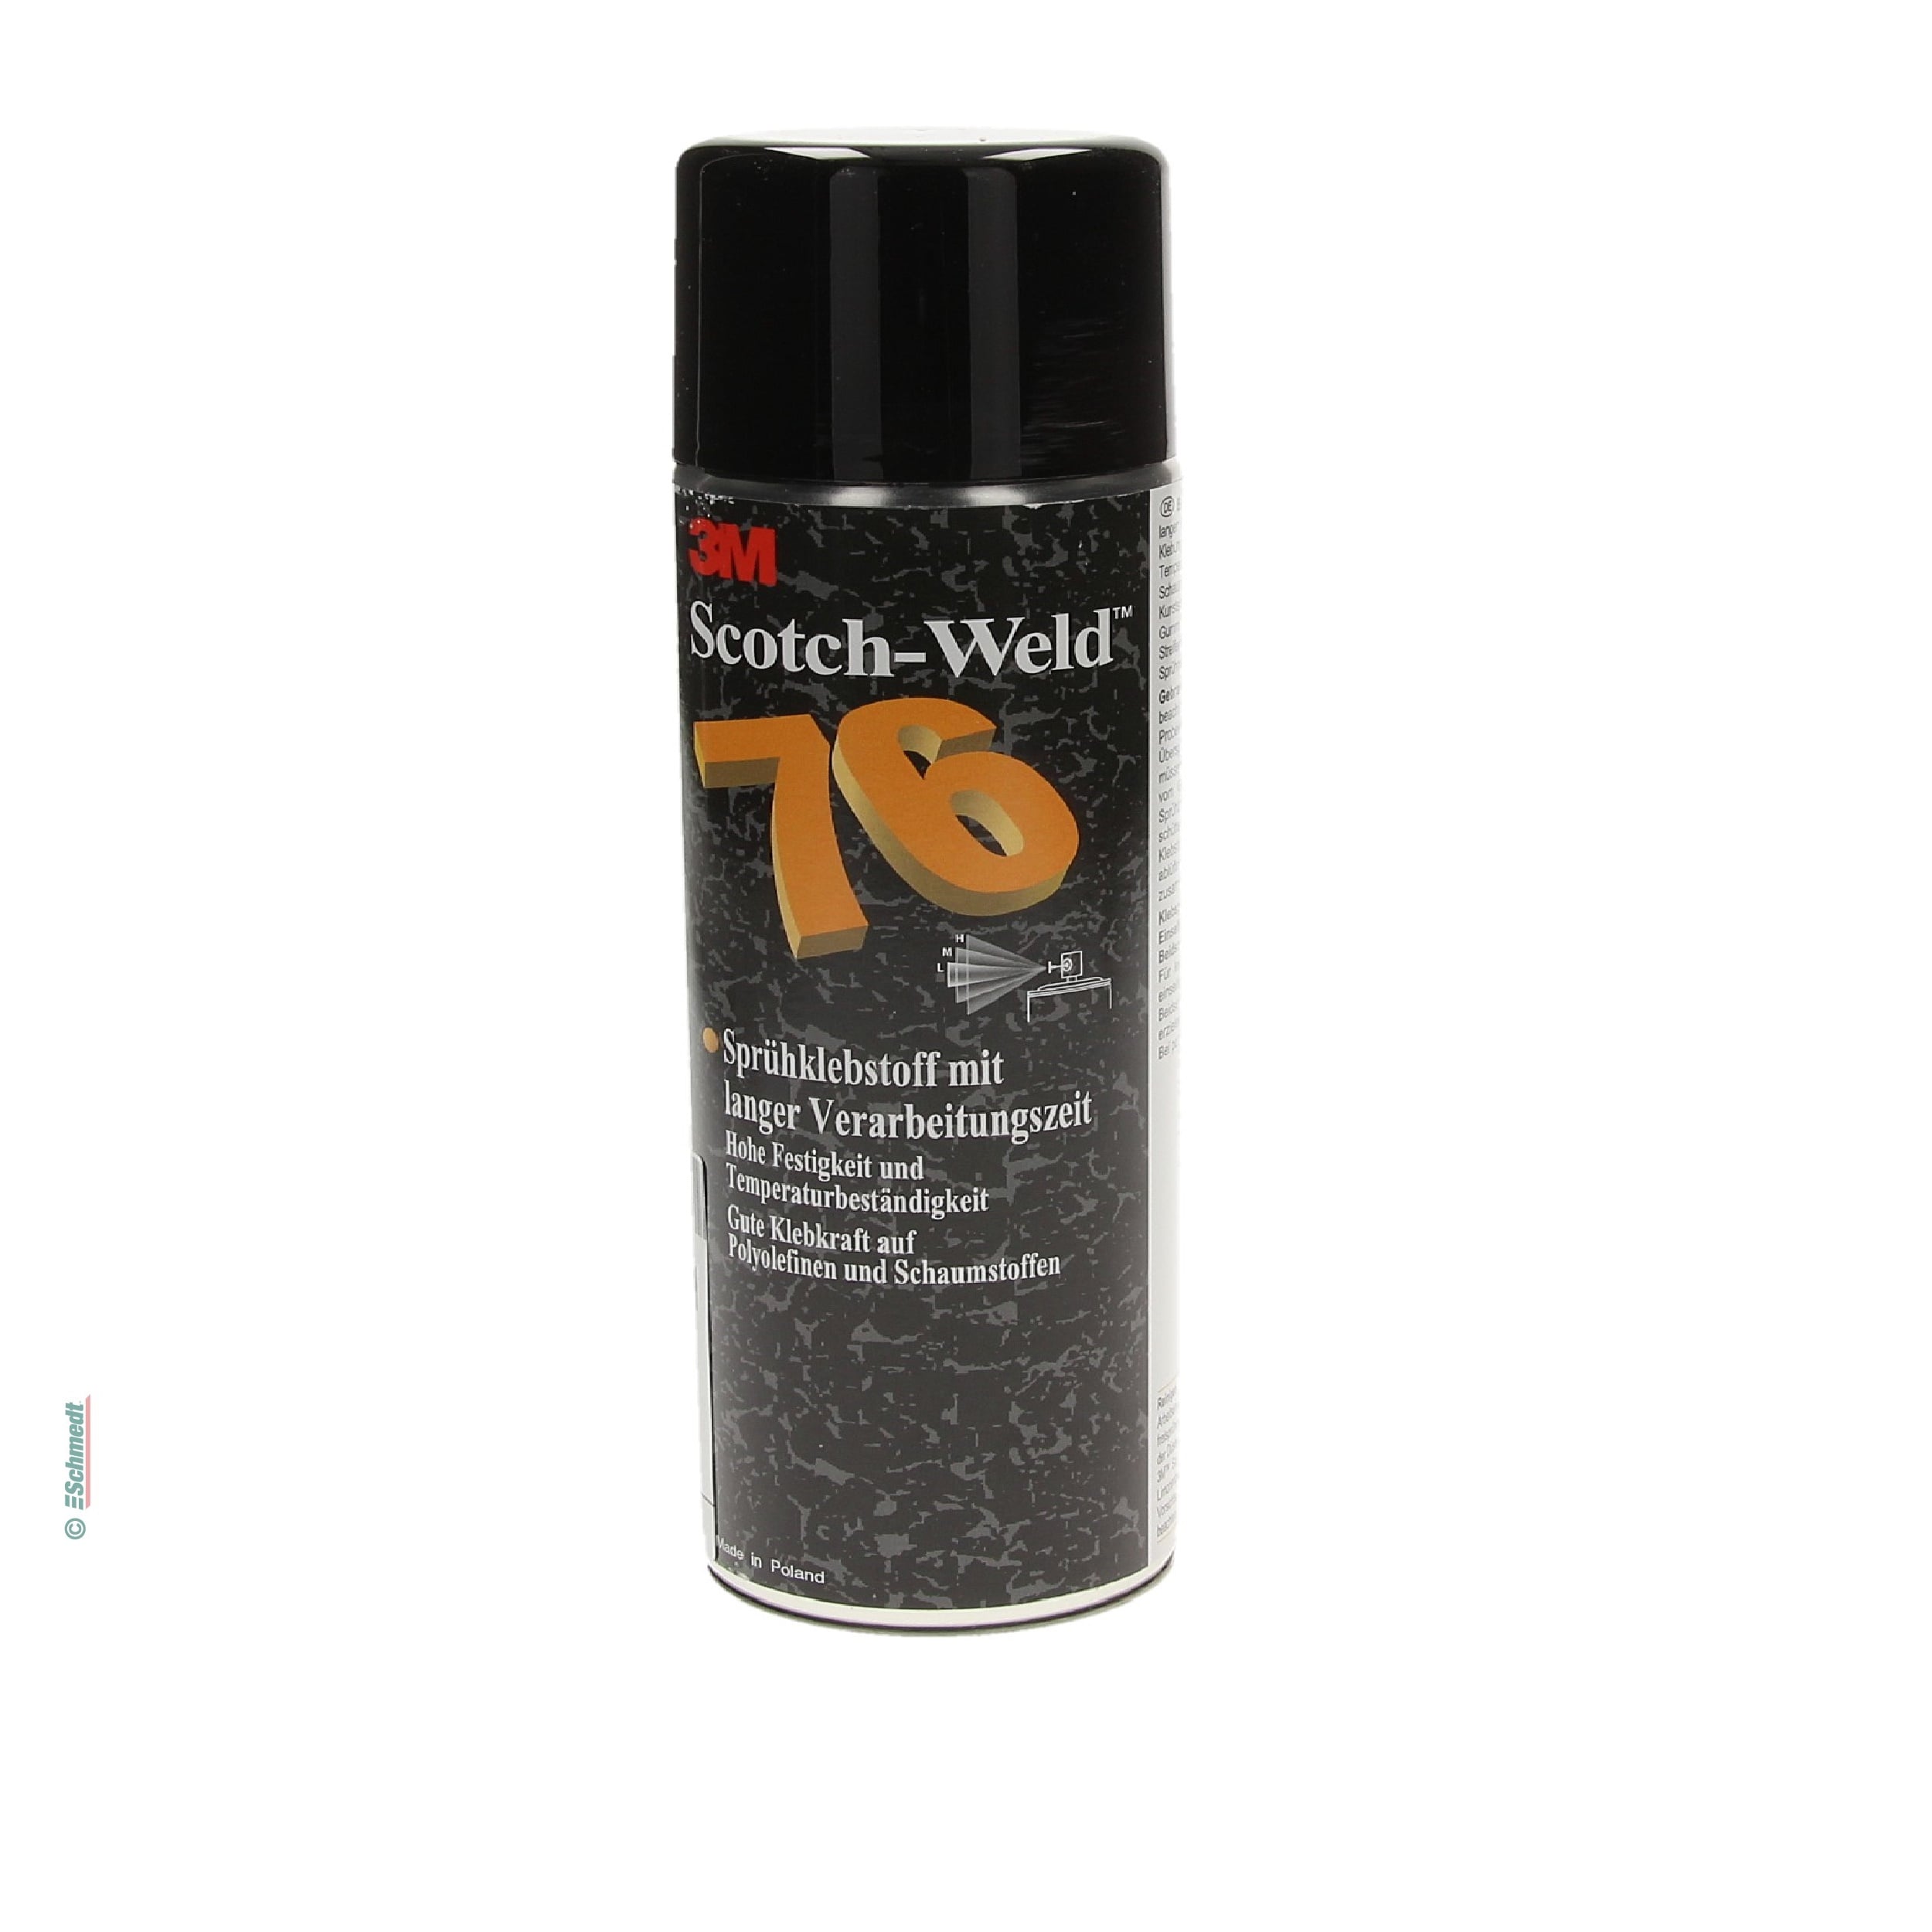 Spray adhesive Type Scotch-Weld 76 - for permanent fixing - Gluing metals, wood, cardboard, felt, rubber as well as foam and several plastic...